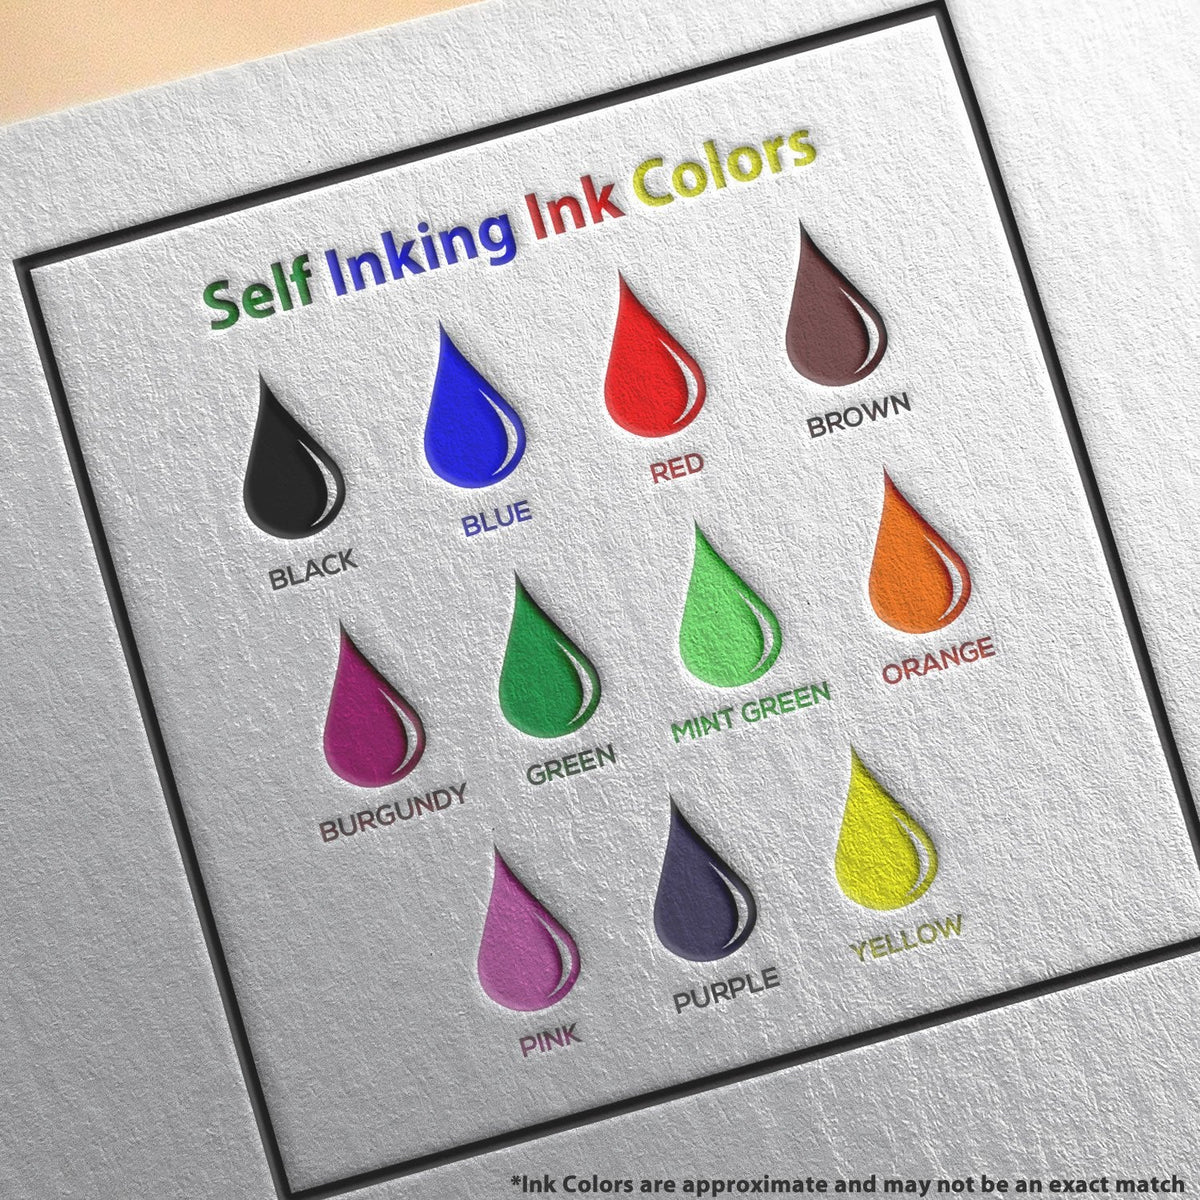 Self-Inking Paid with Ck No Stamp Stamp Ink Color Options